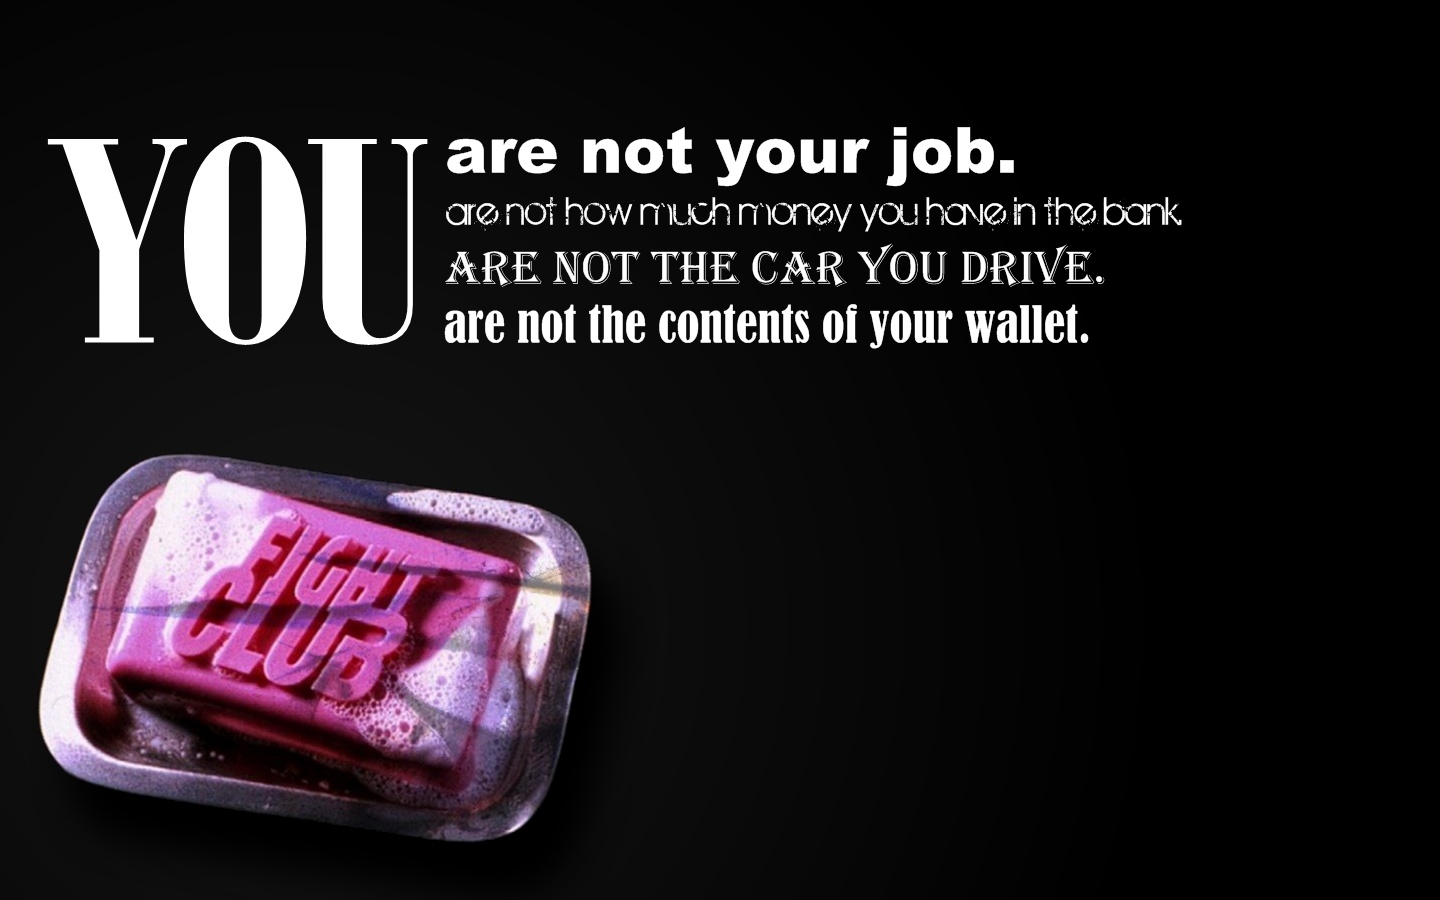 fight club wallpaper,product,text,pink,font,material property